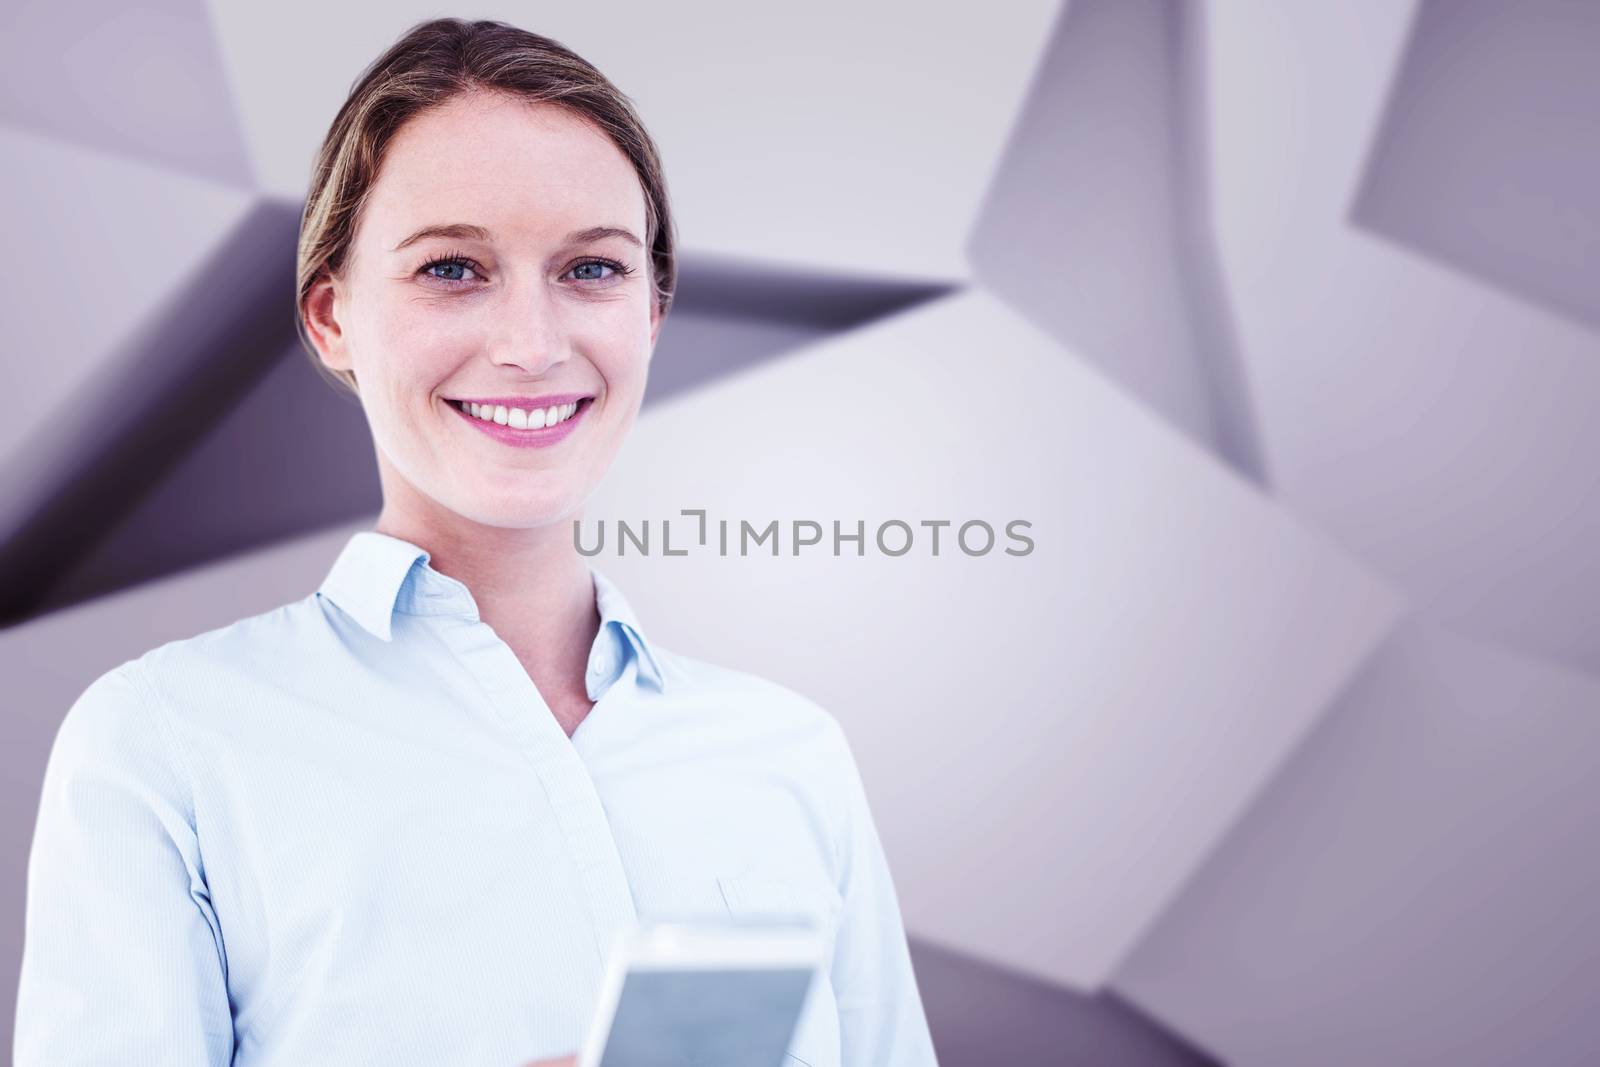 Businesswoman using her mobile phone against abstract grey room